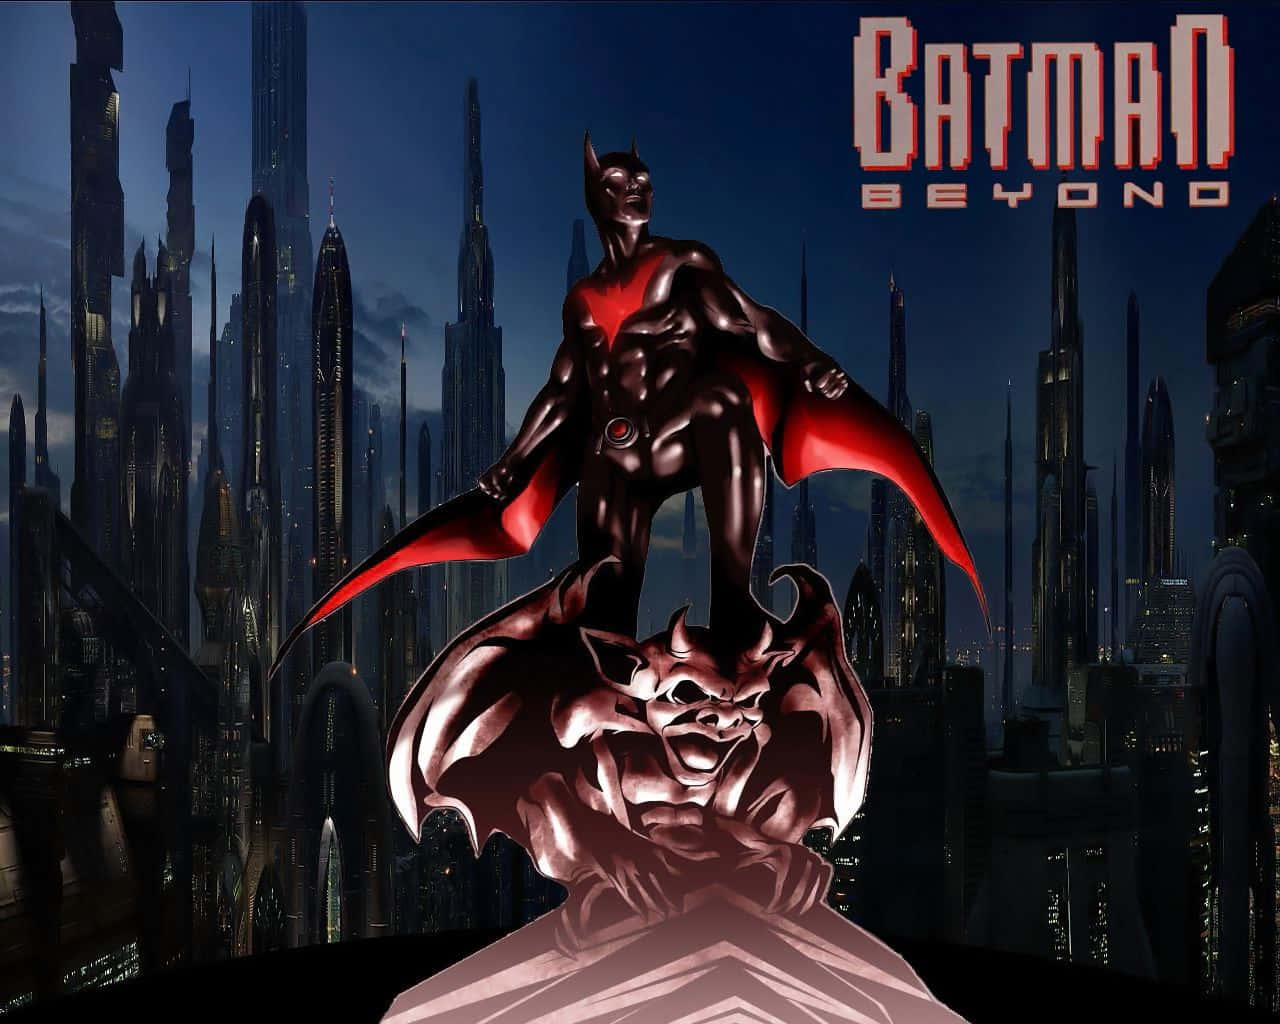 “Rise up to save the future with Batman Beyond”